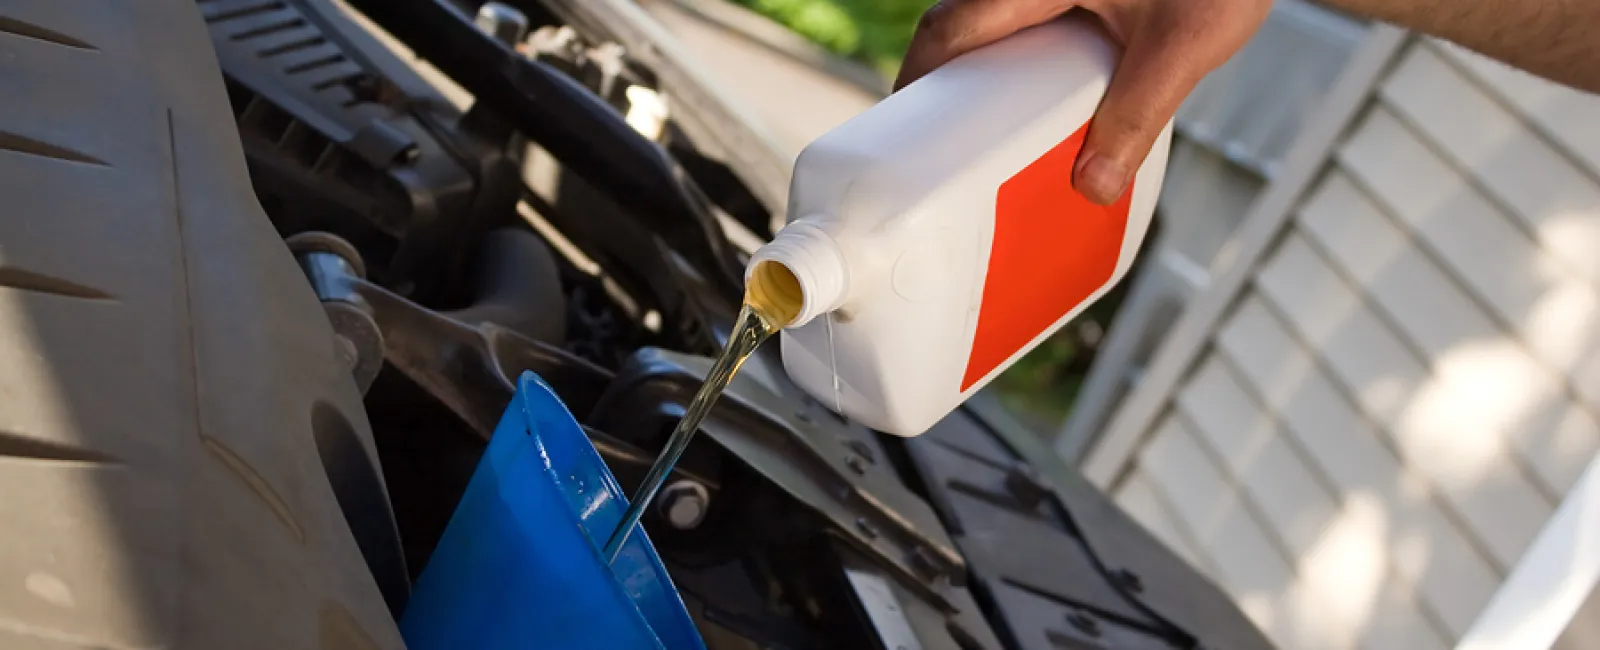 When Is The Right Time For An Oil Change?